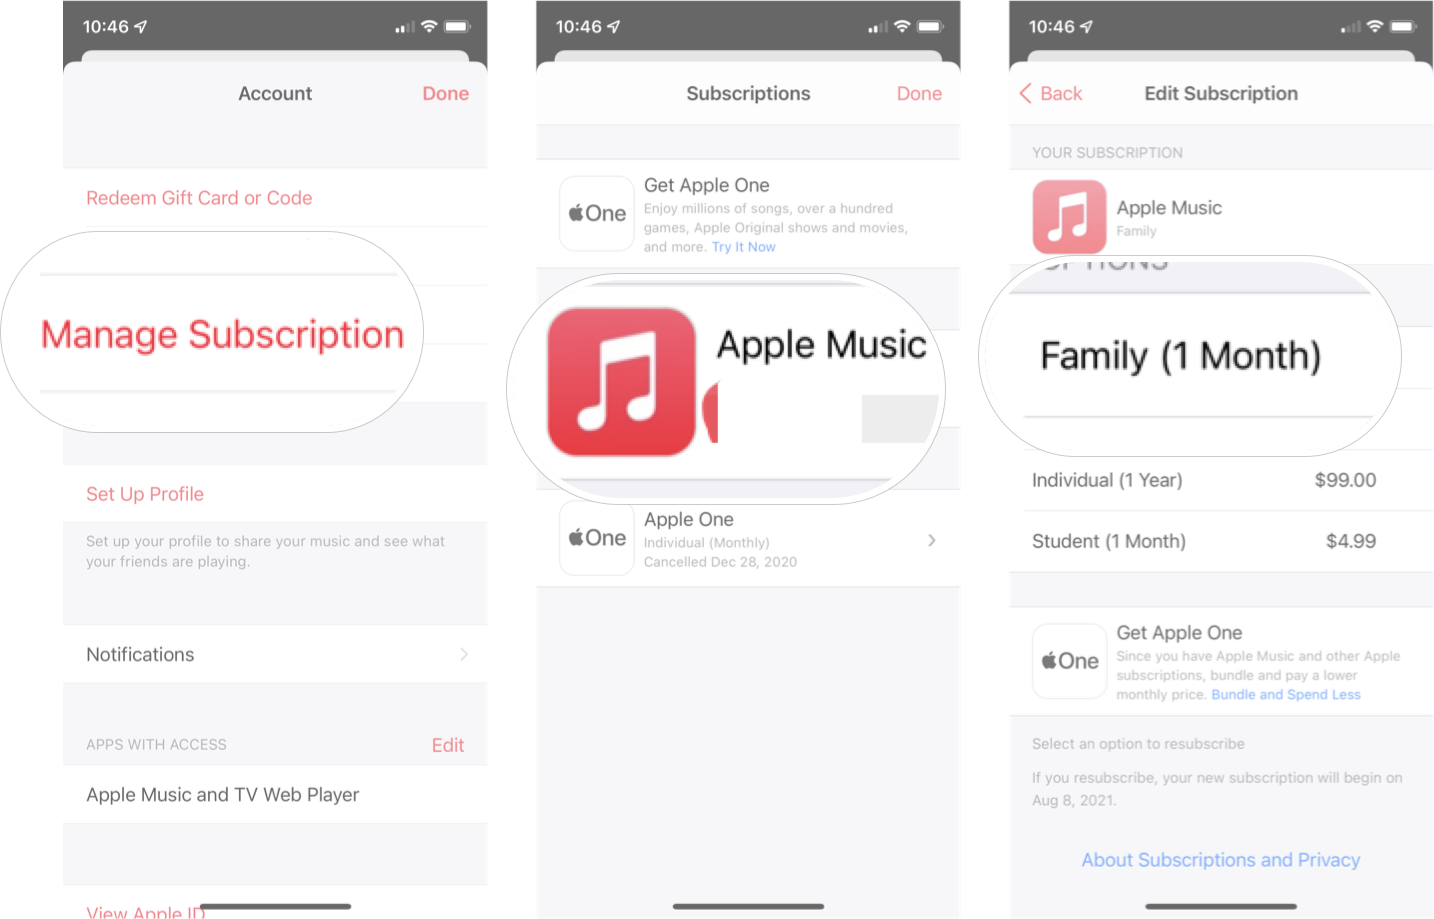 How To Switch Single To Family Plane Apple Music On iOS 14: Tap Manage Subscription, tap Apple Music, and then tap Family Plan.